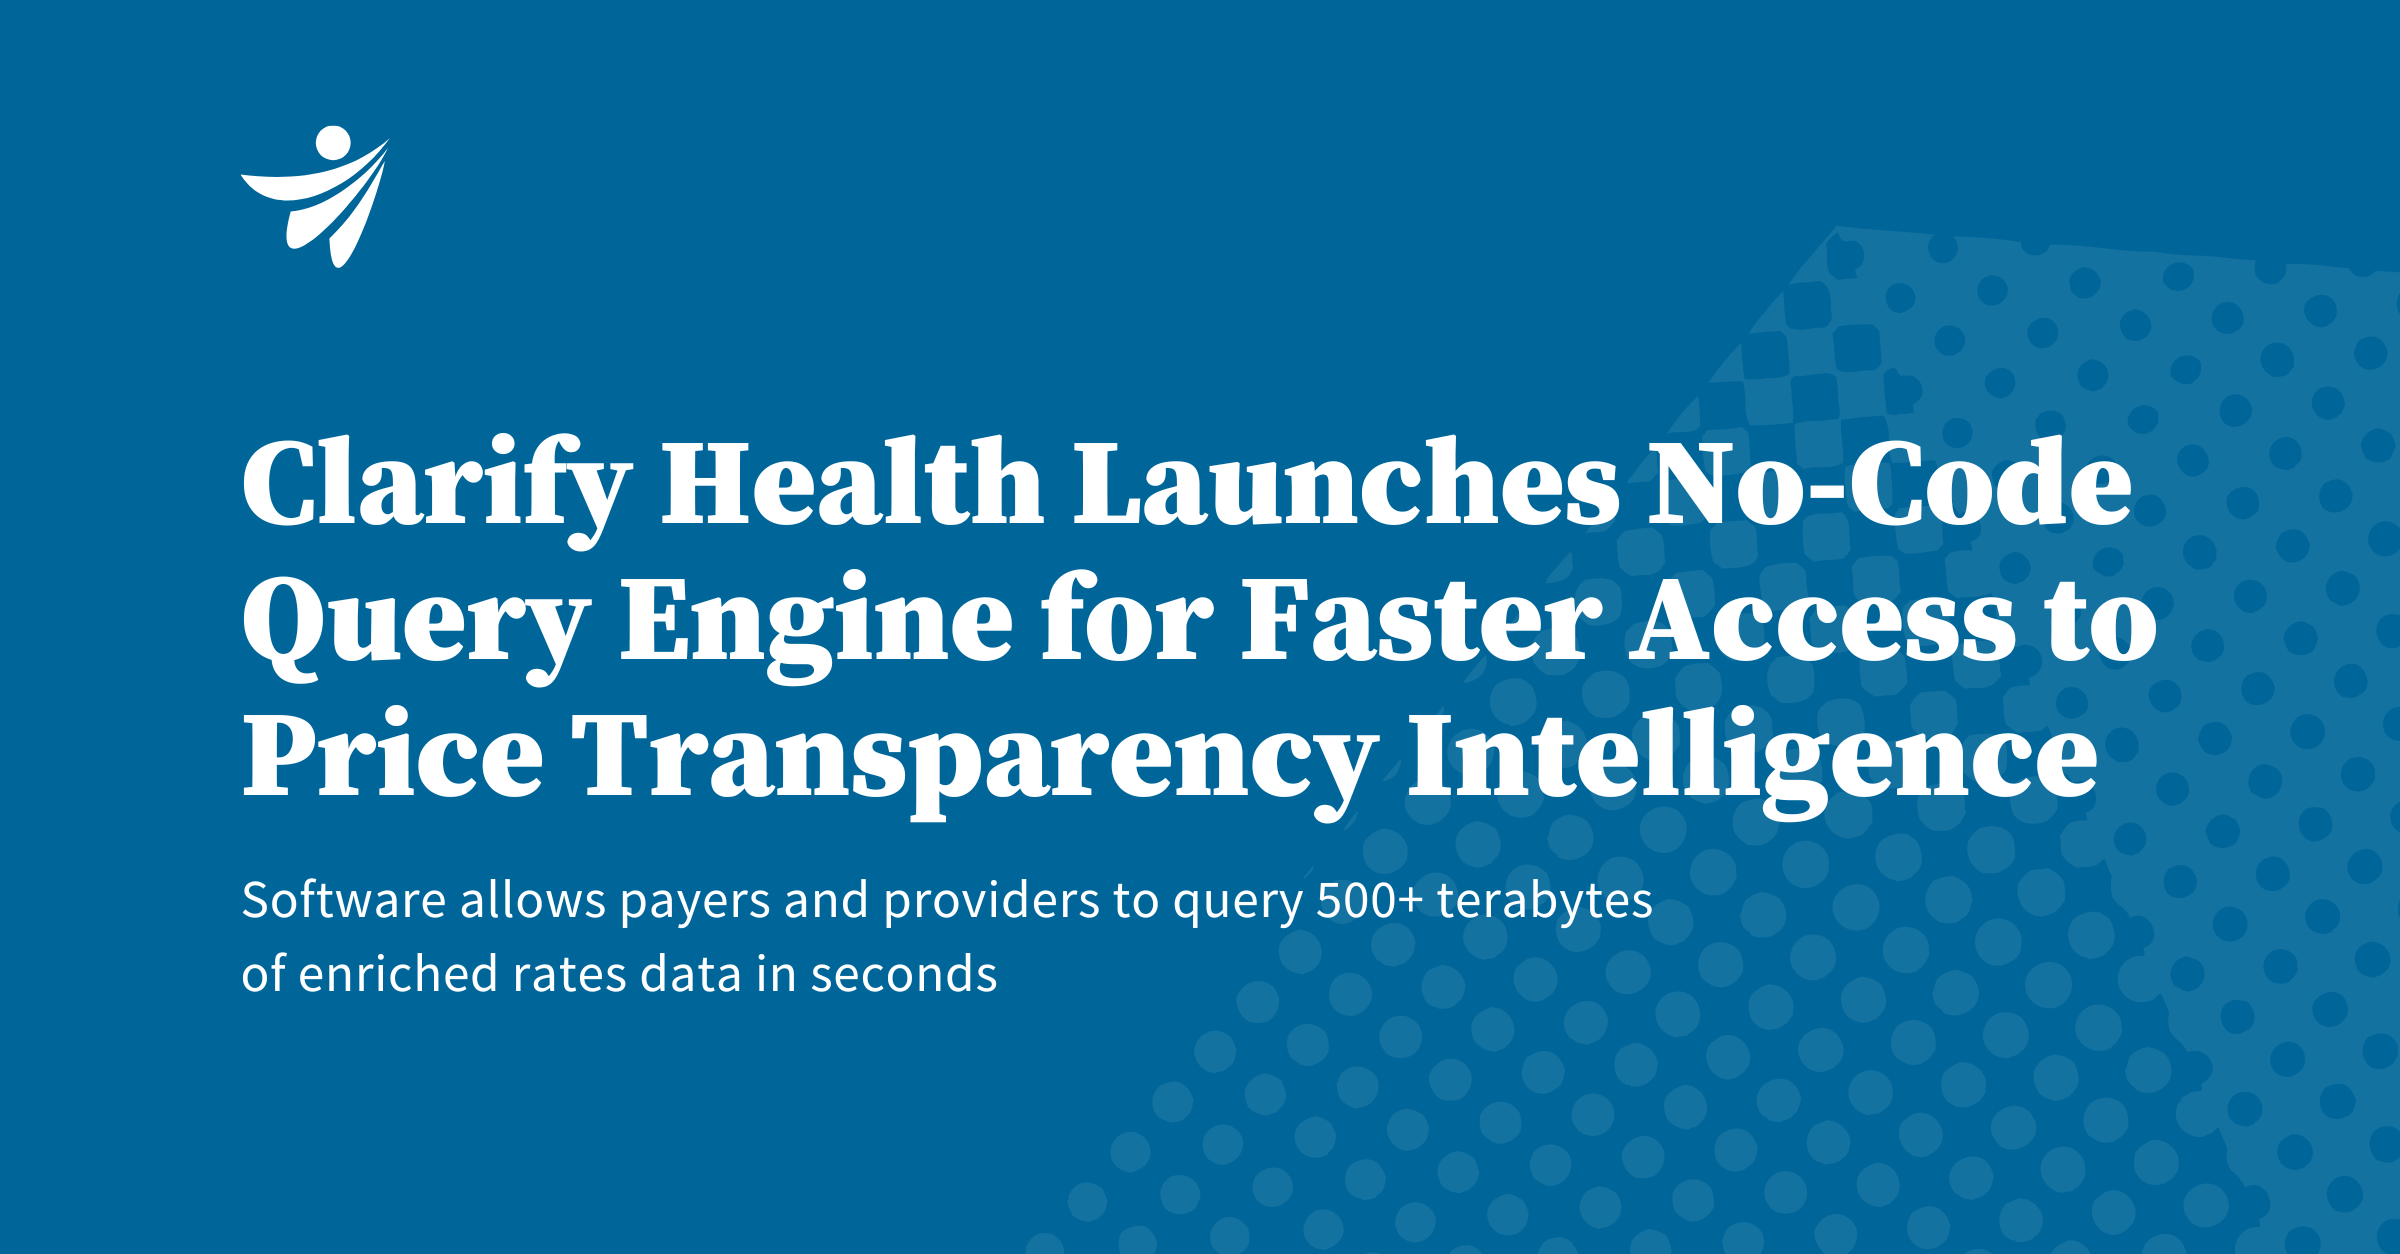 Thumbnail for Clarify Health Launches No-Code Query Engine for Faster Access to Price Transparency Intelligence